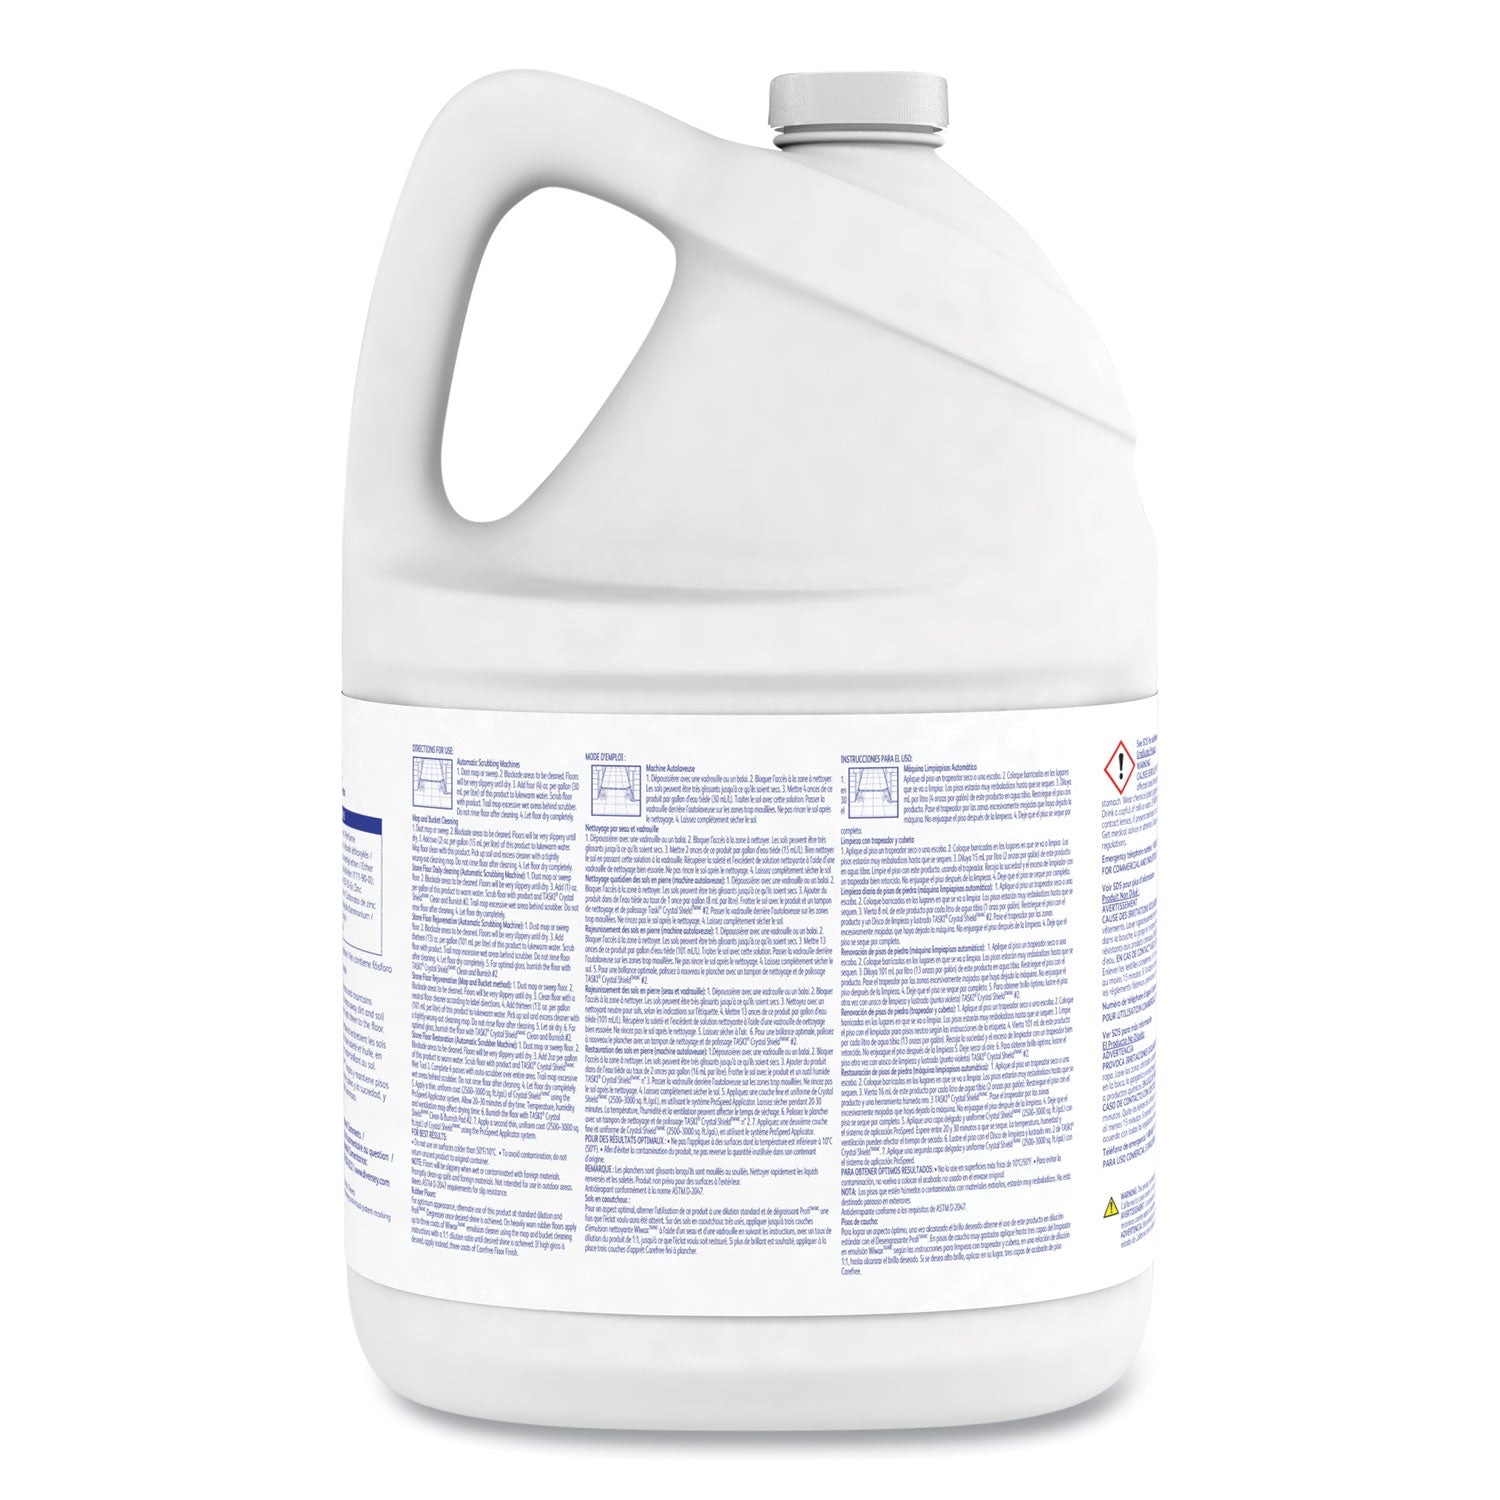 wiwax-cleaning-and-maintenance-solution-liquid-1-gal-bottle-4-carton_dvo94512767 - 3